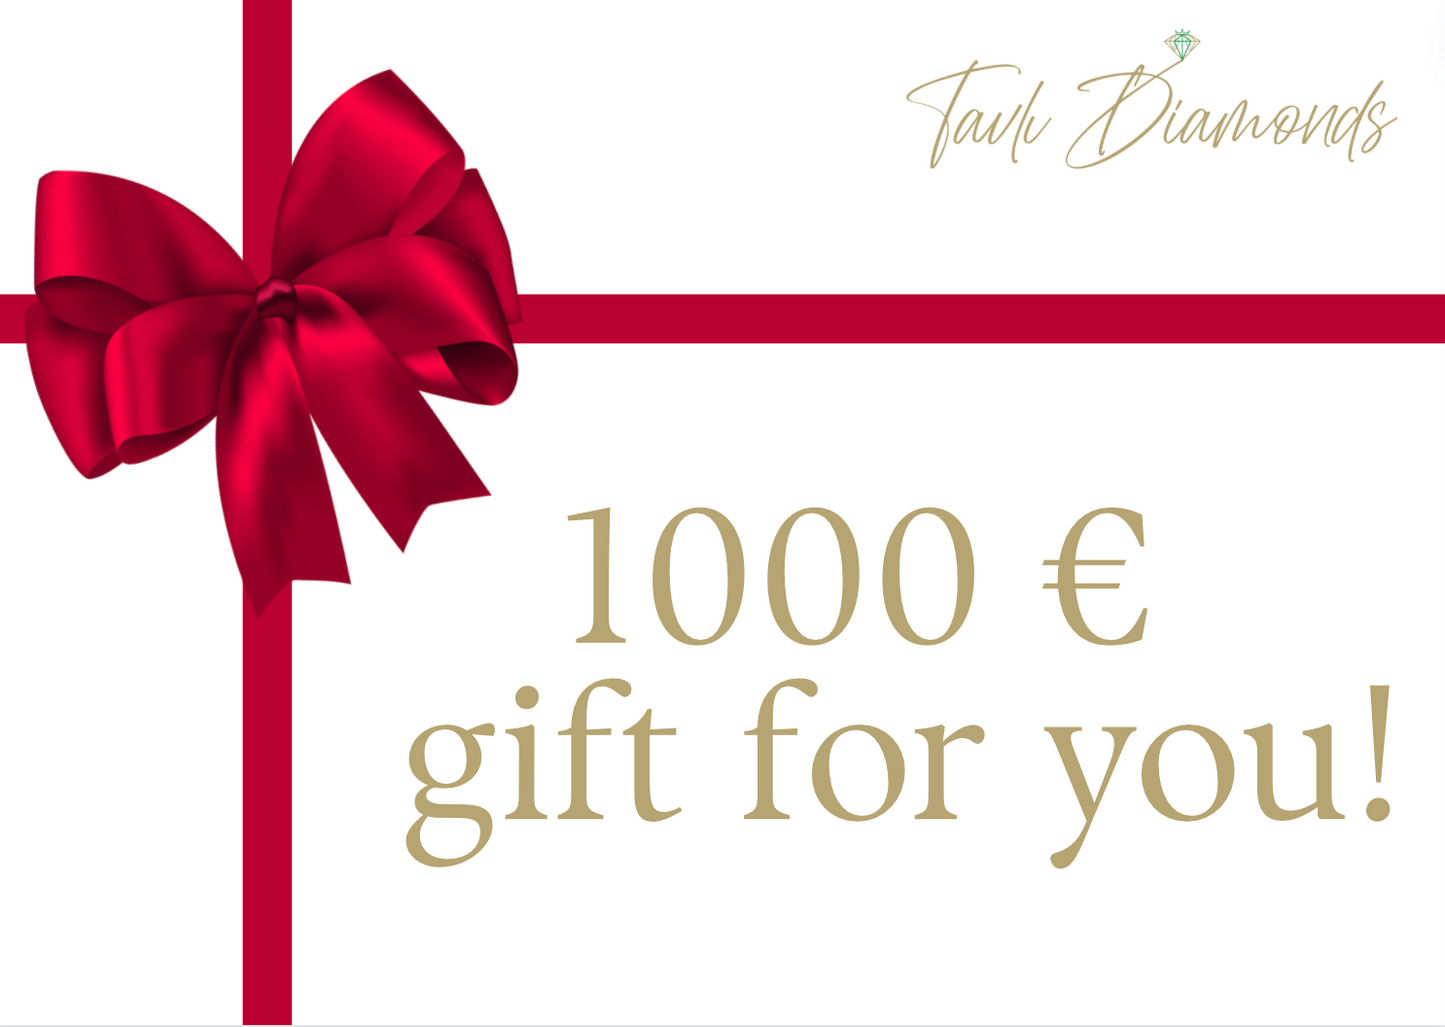 GET 1000€ GIFT NOW